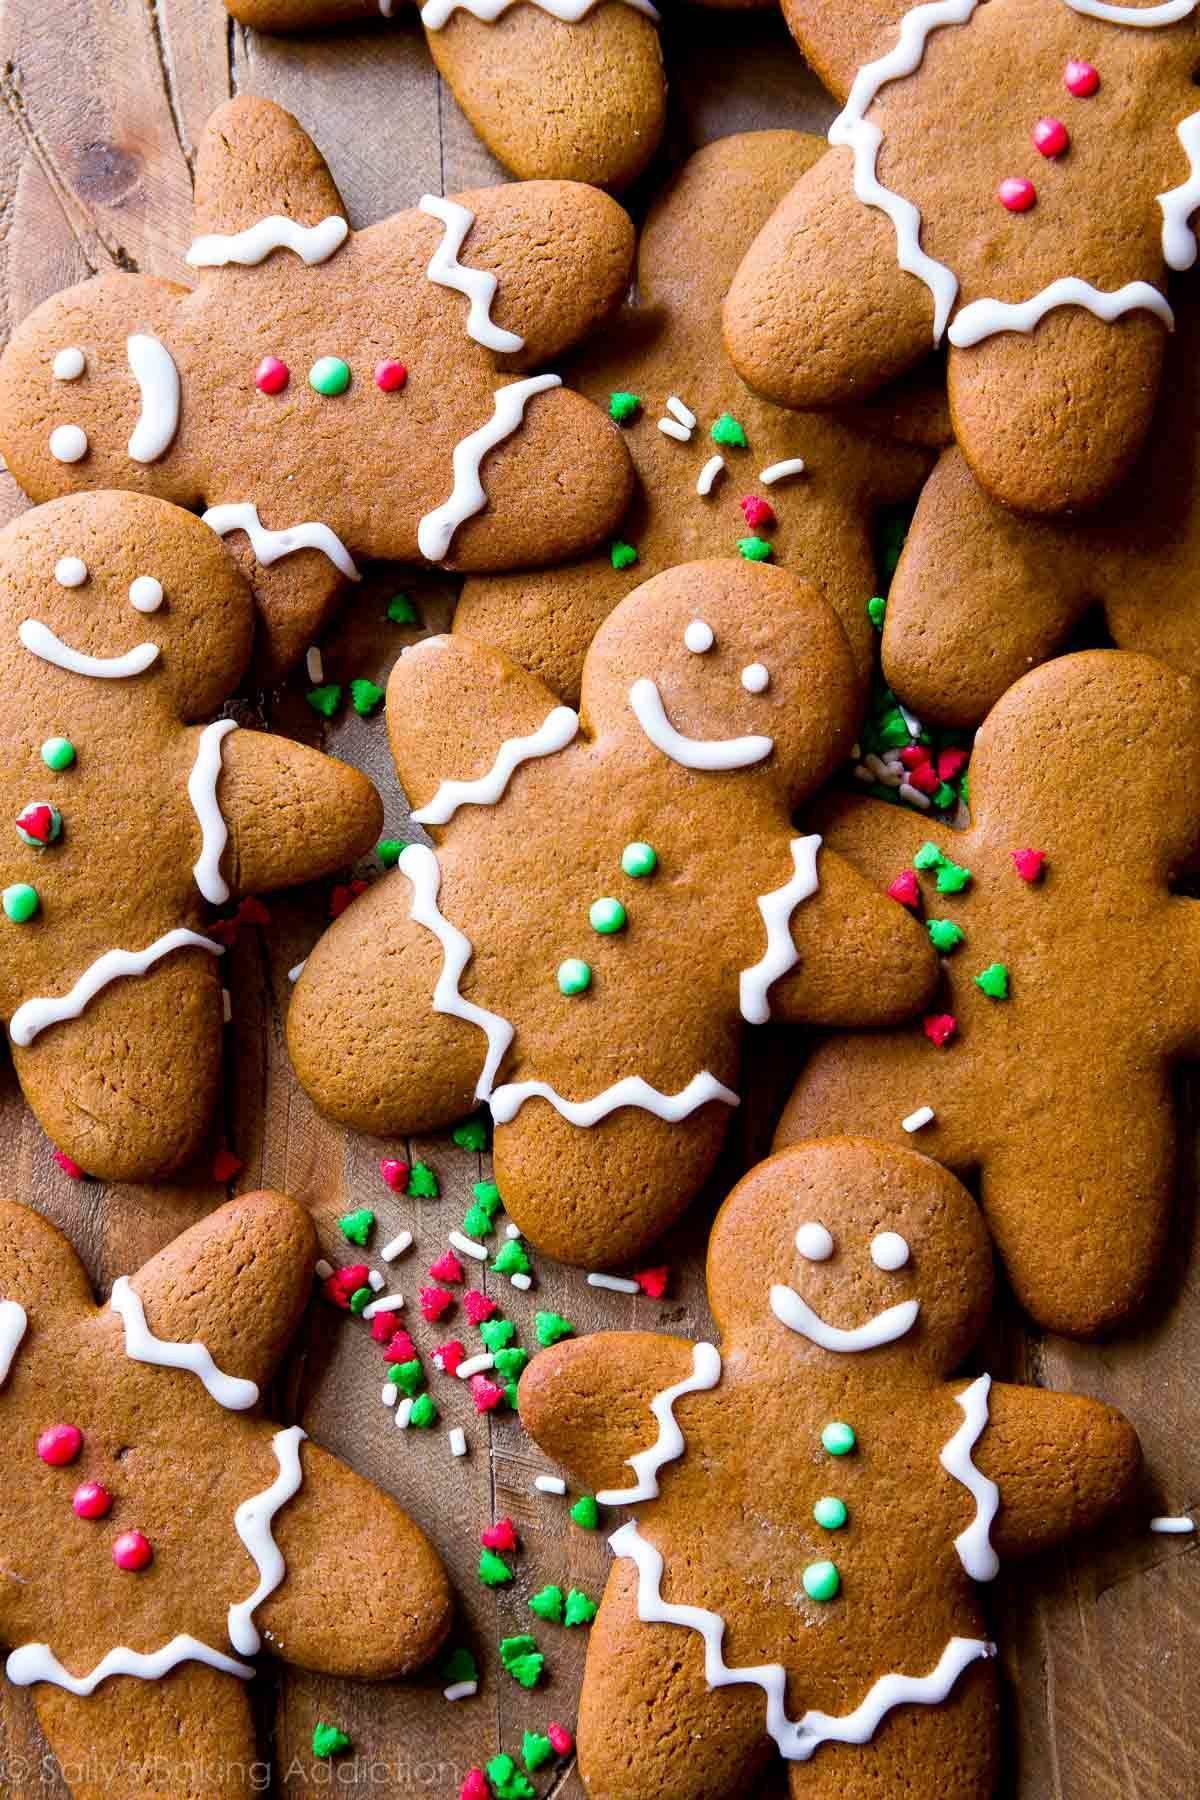 Gingerbread cookies on a wooden surface.